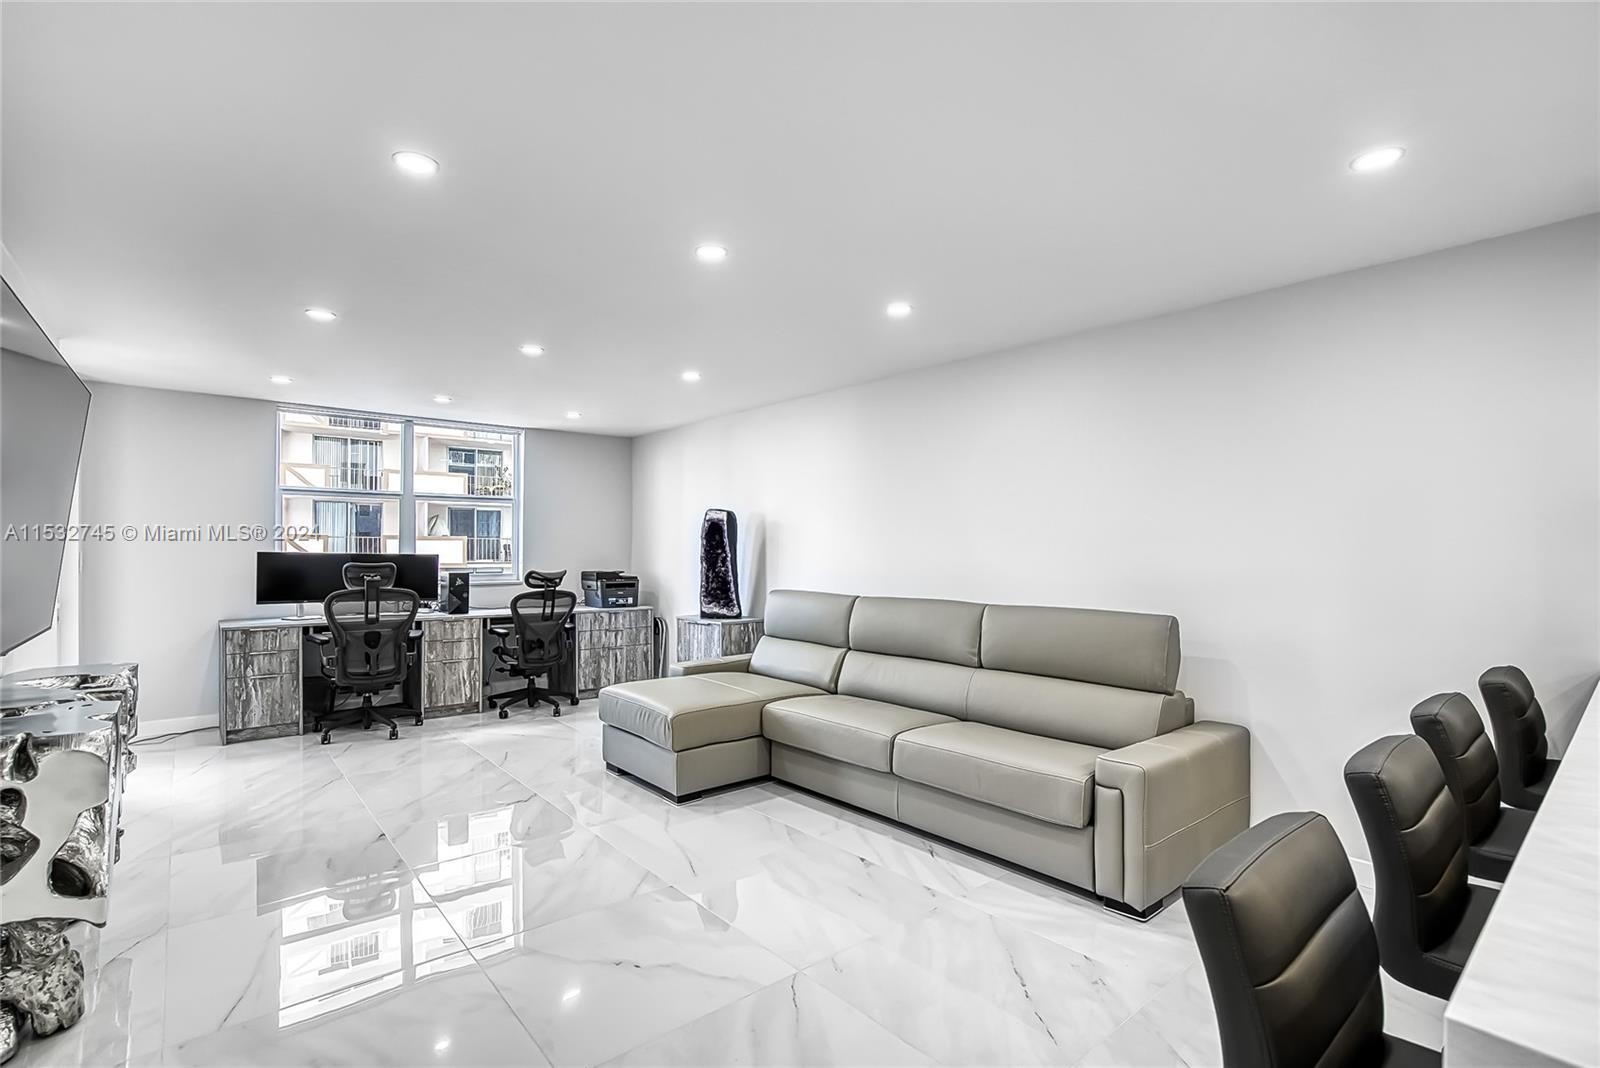 Just renovated this modern 1-bedroom, 1.5-bathroom apartment features:
Open concept living room and